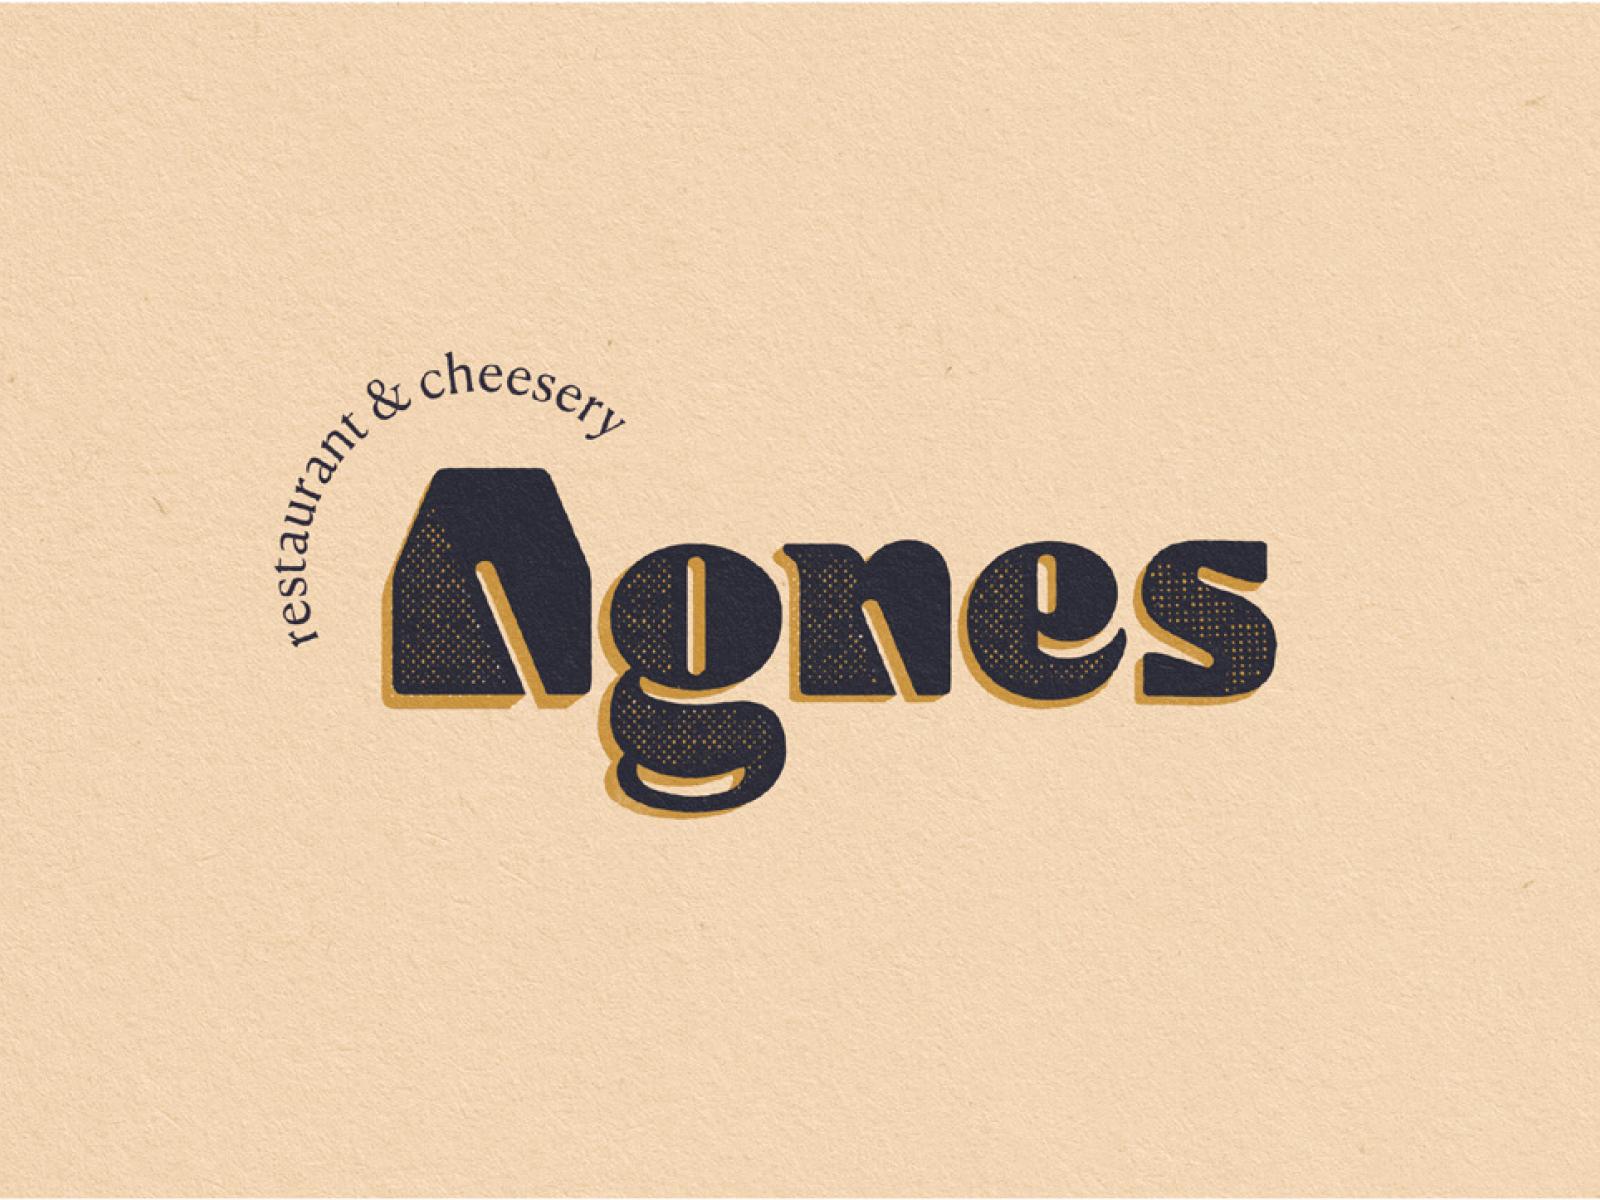 Agnes Restaurant and Cheesery